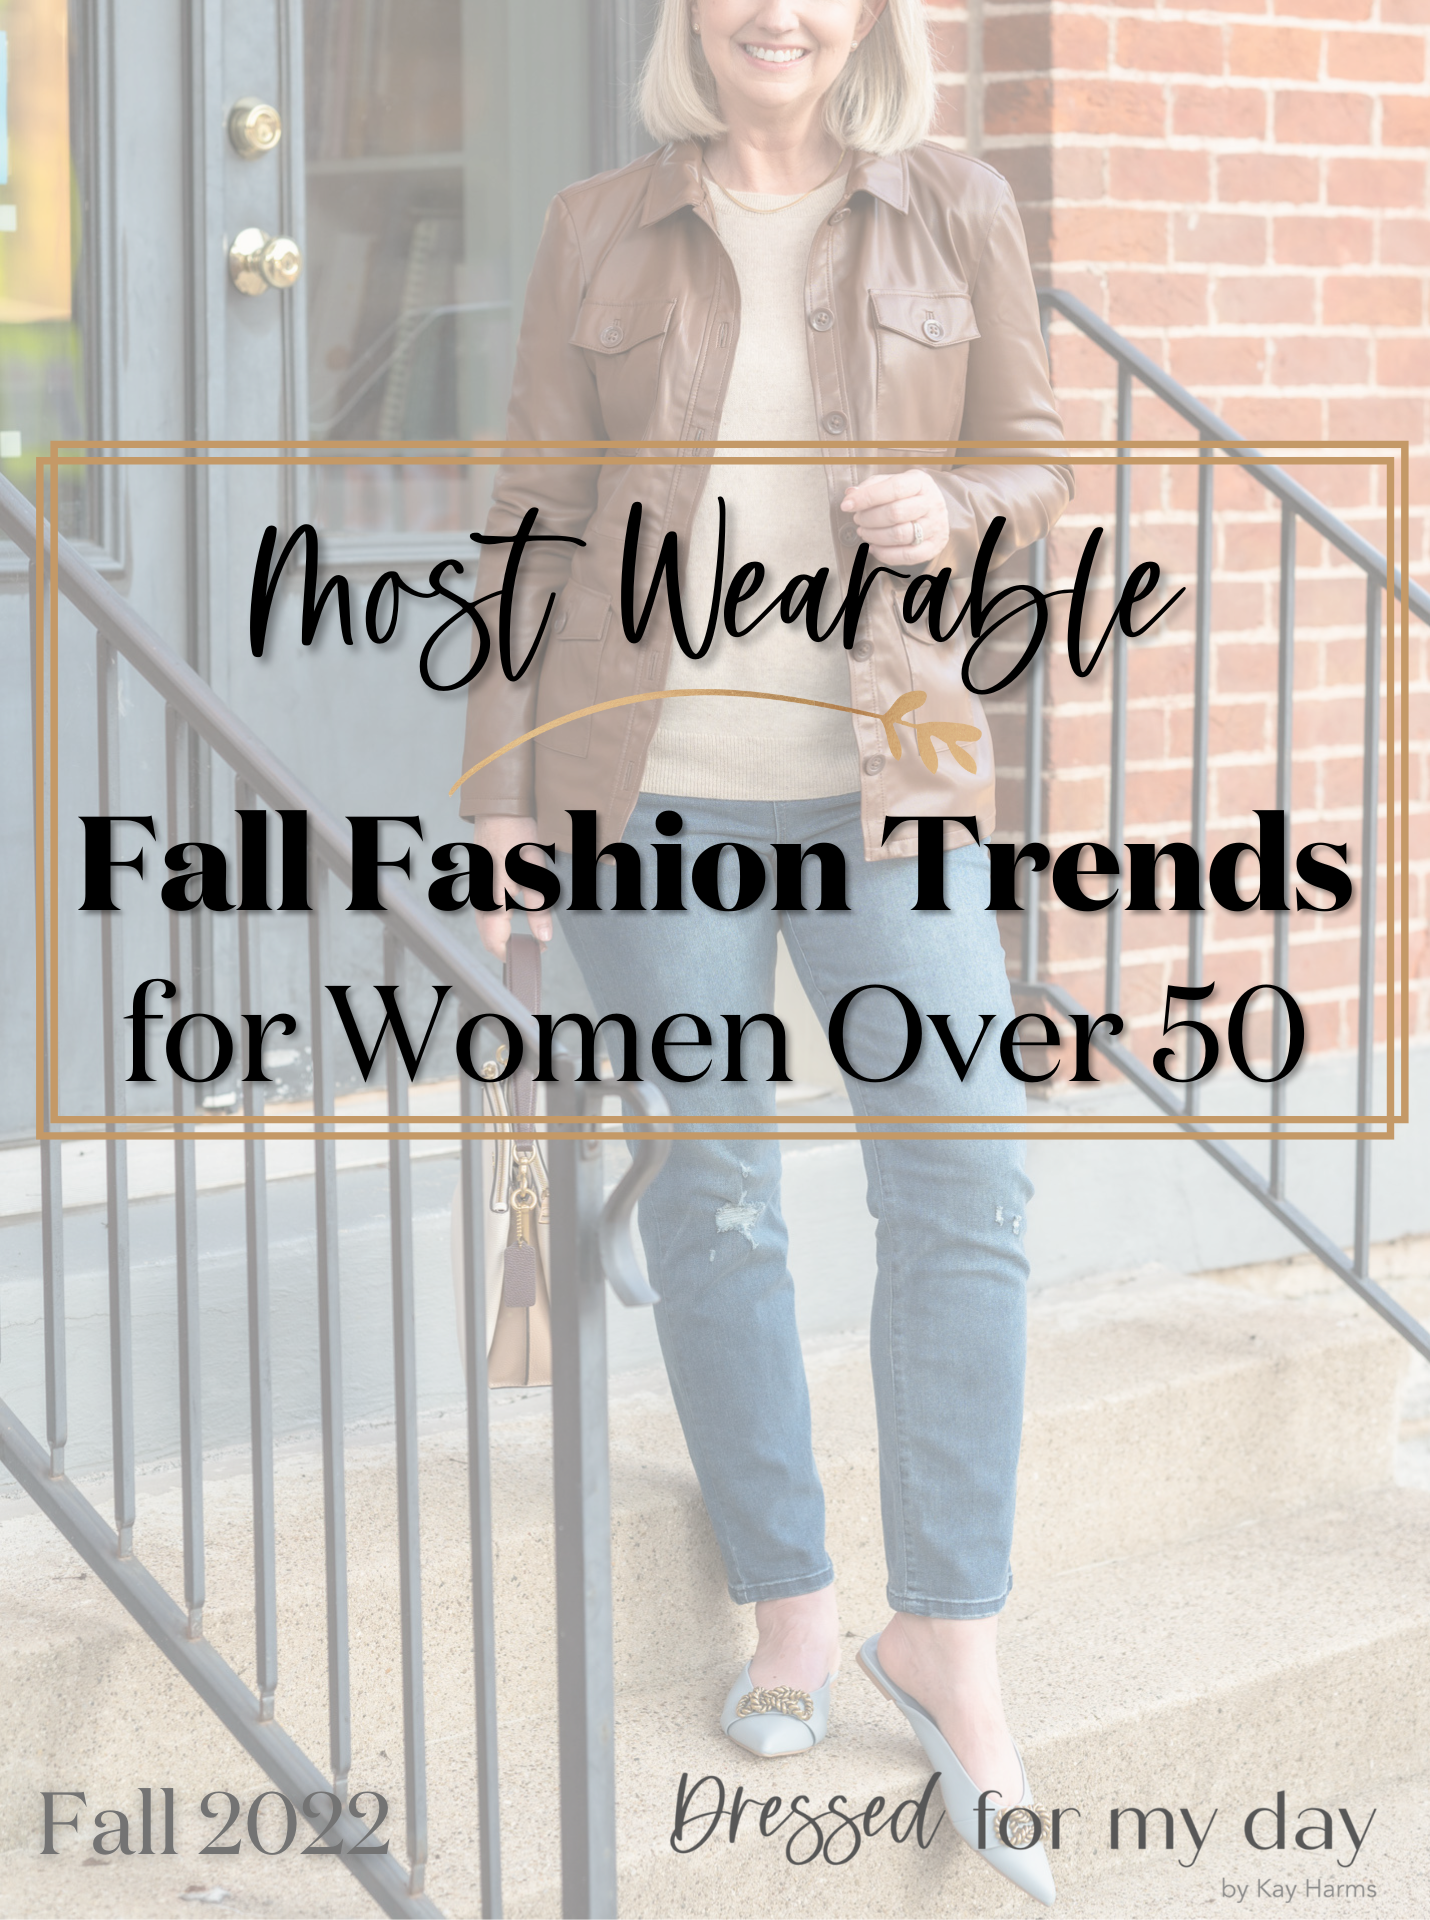 Most Wearable Fall Fashion Trends for Women Over 50